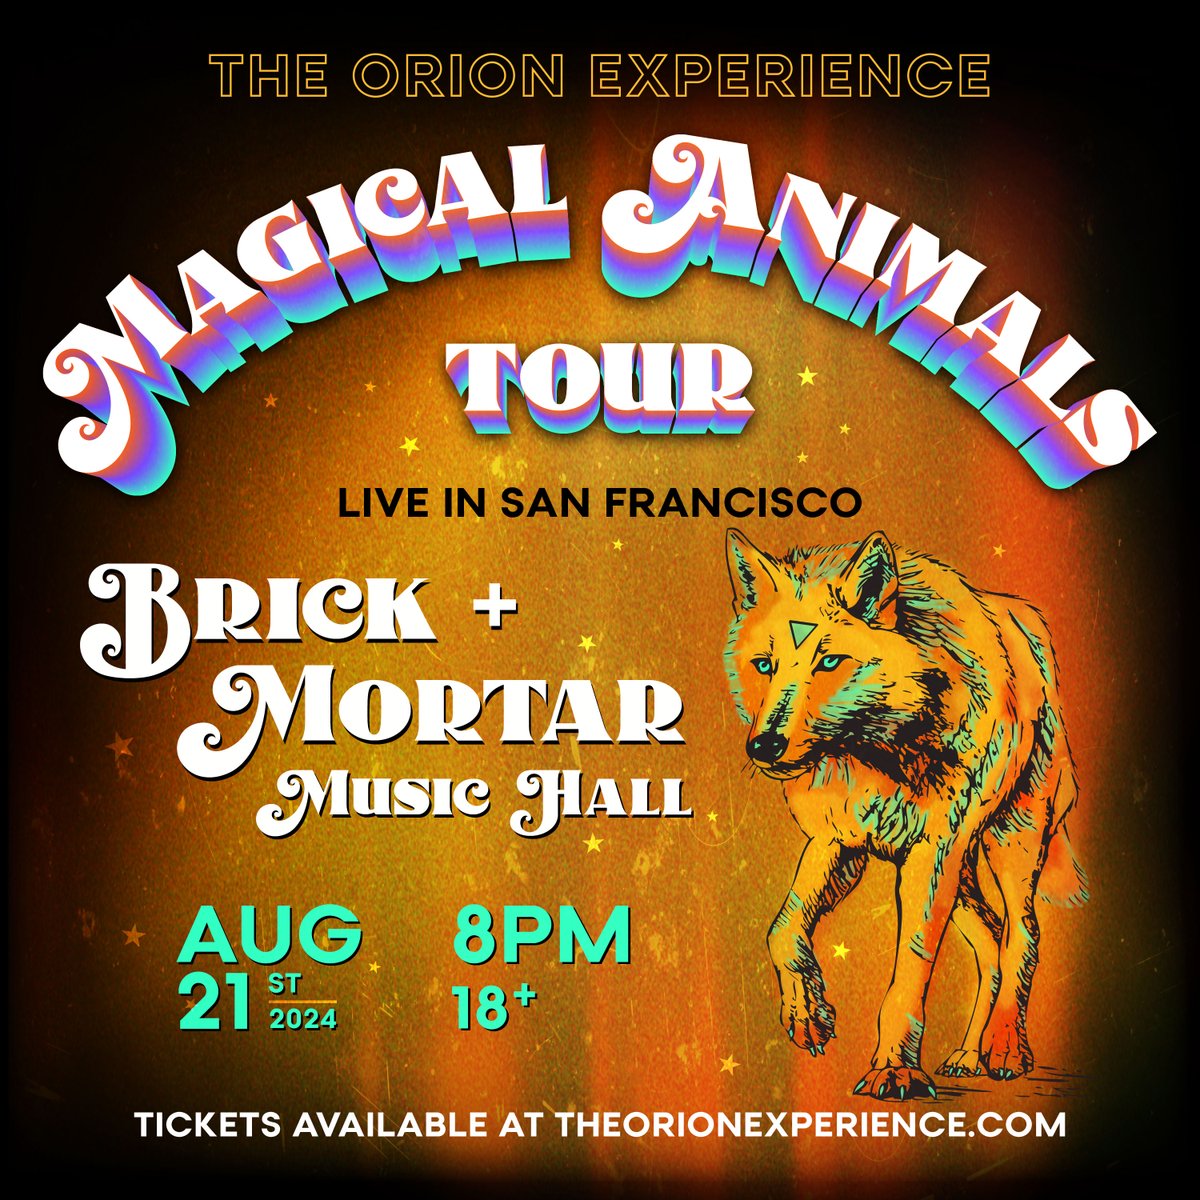 ON SALE NOW! @orionexperience's #MagicalAnimalsTour is live in SF on August 21st. TICKETS: bit.ly/4424Cve